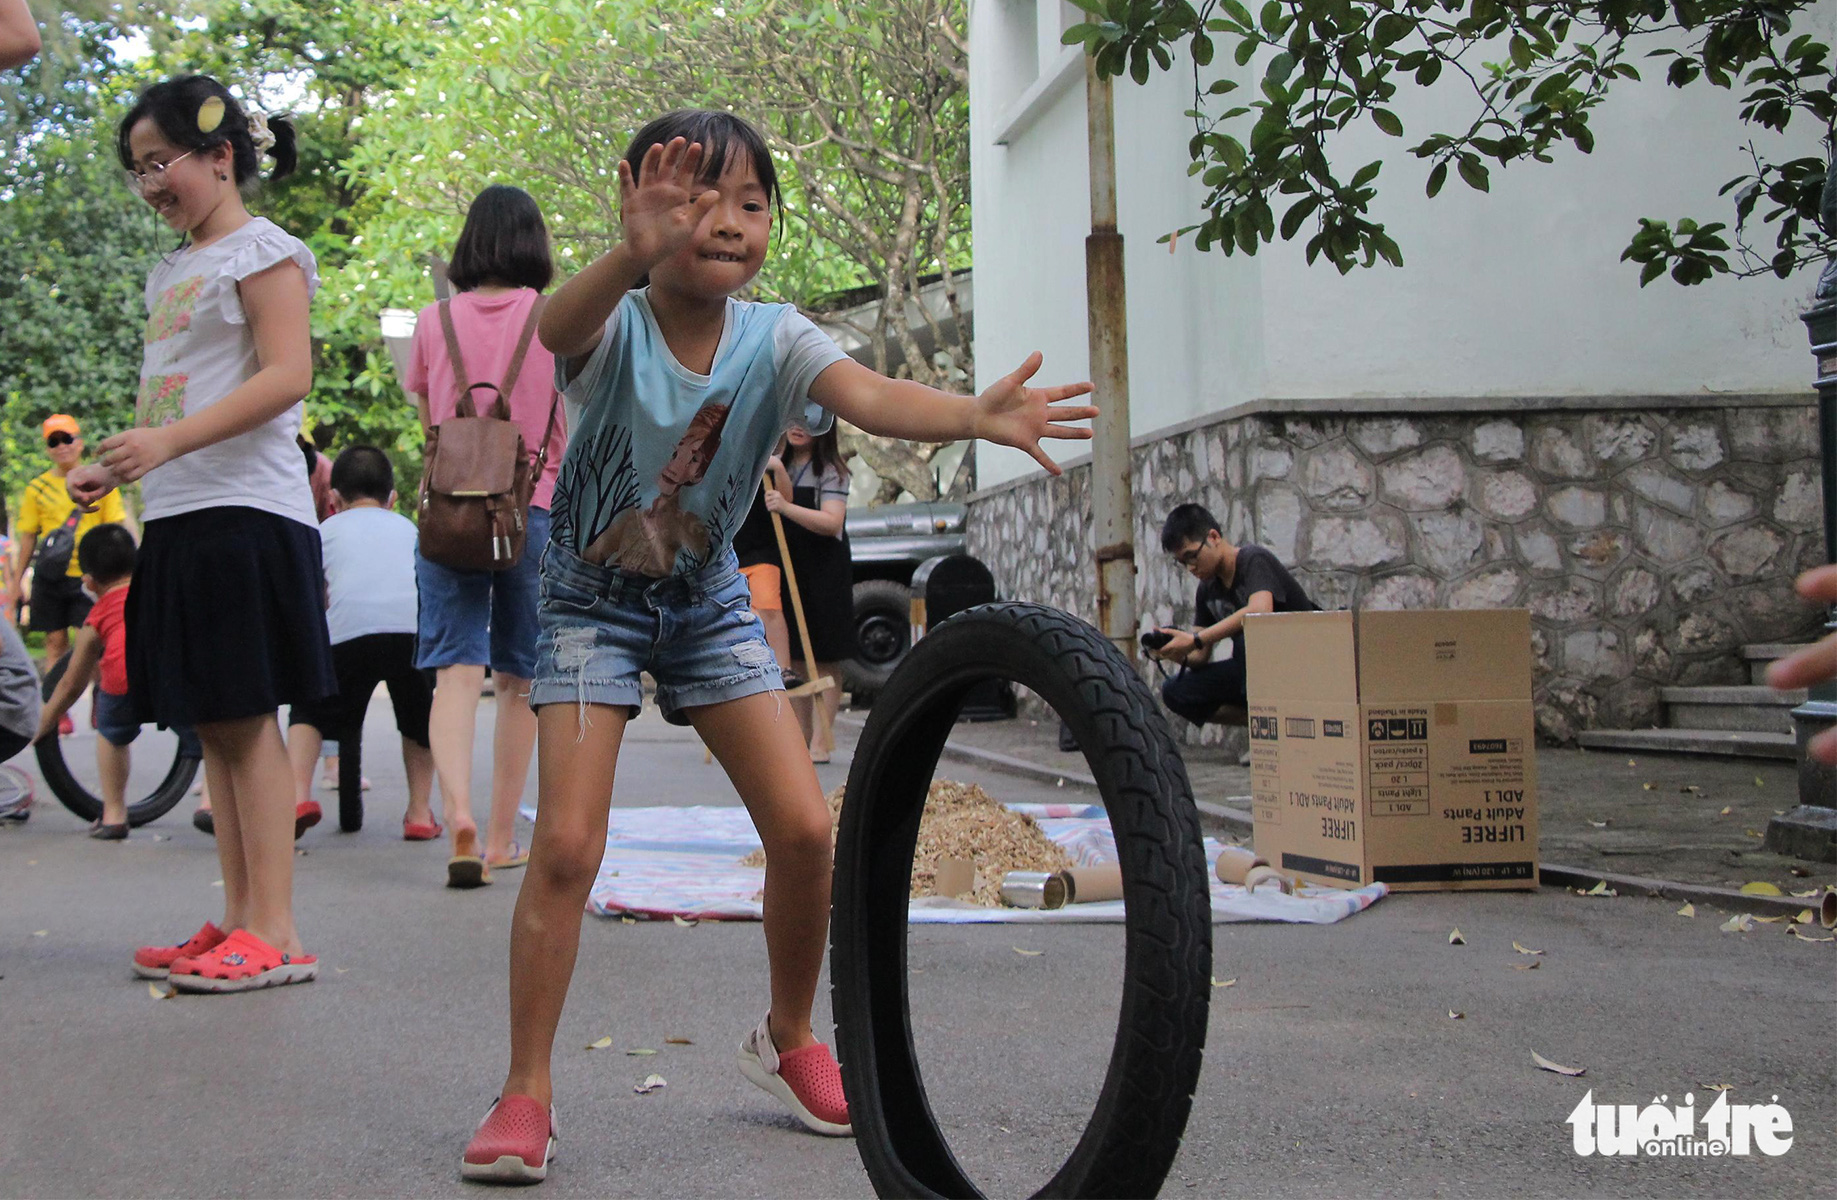 A girl plays with an old tire at the ‘Kingdom of Recycled Materials’ event in Hanoi, Vietnam, May 31, 2020. Photo: Ha Thanh / Tuoi Tre